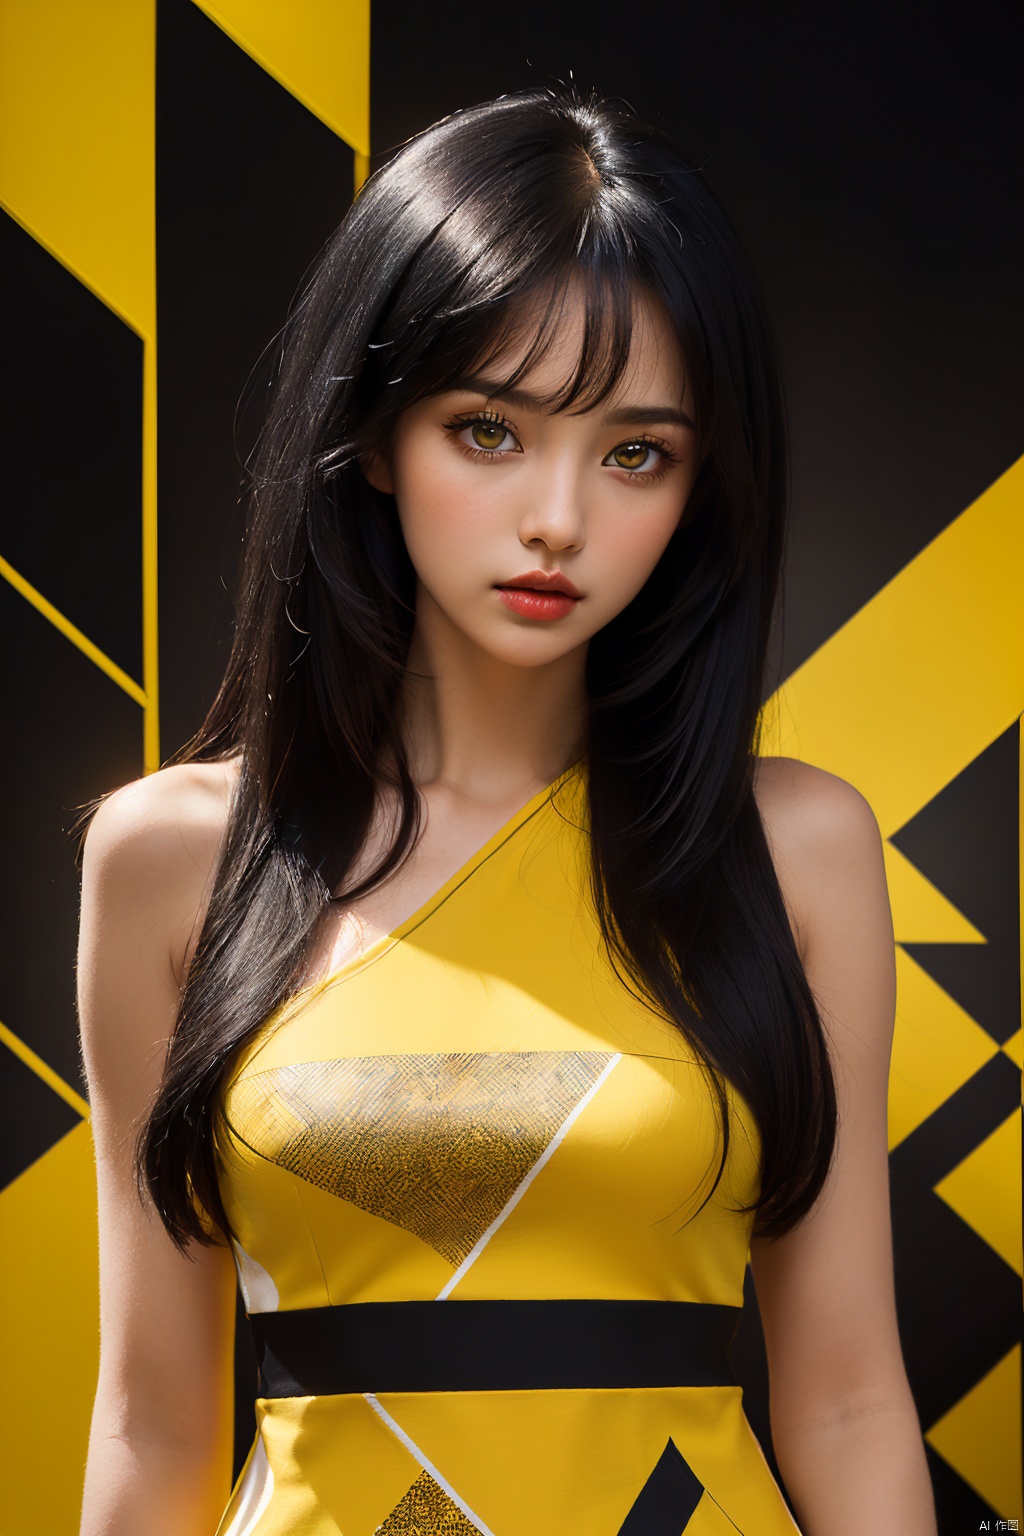  (masterpiece, top quality, best quality, ((standing in centre)), ((1girl, black hair)), ((upper body, symmetrical composition)), ((wear yellow abstract patterns dress bold lines, geometric shapes)), (pure yellow abstract patterns background), ((studio light)) ((studio portrait)), emotional face, face front, extreme detailed